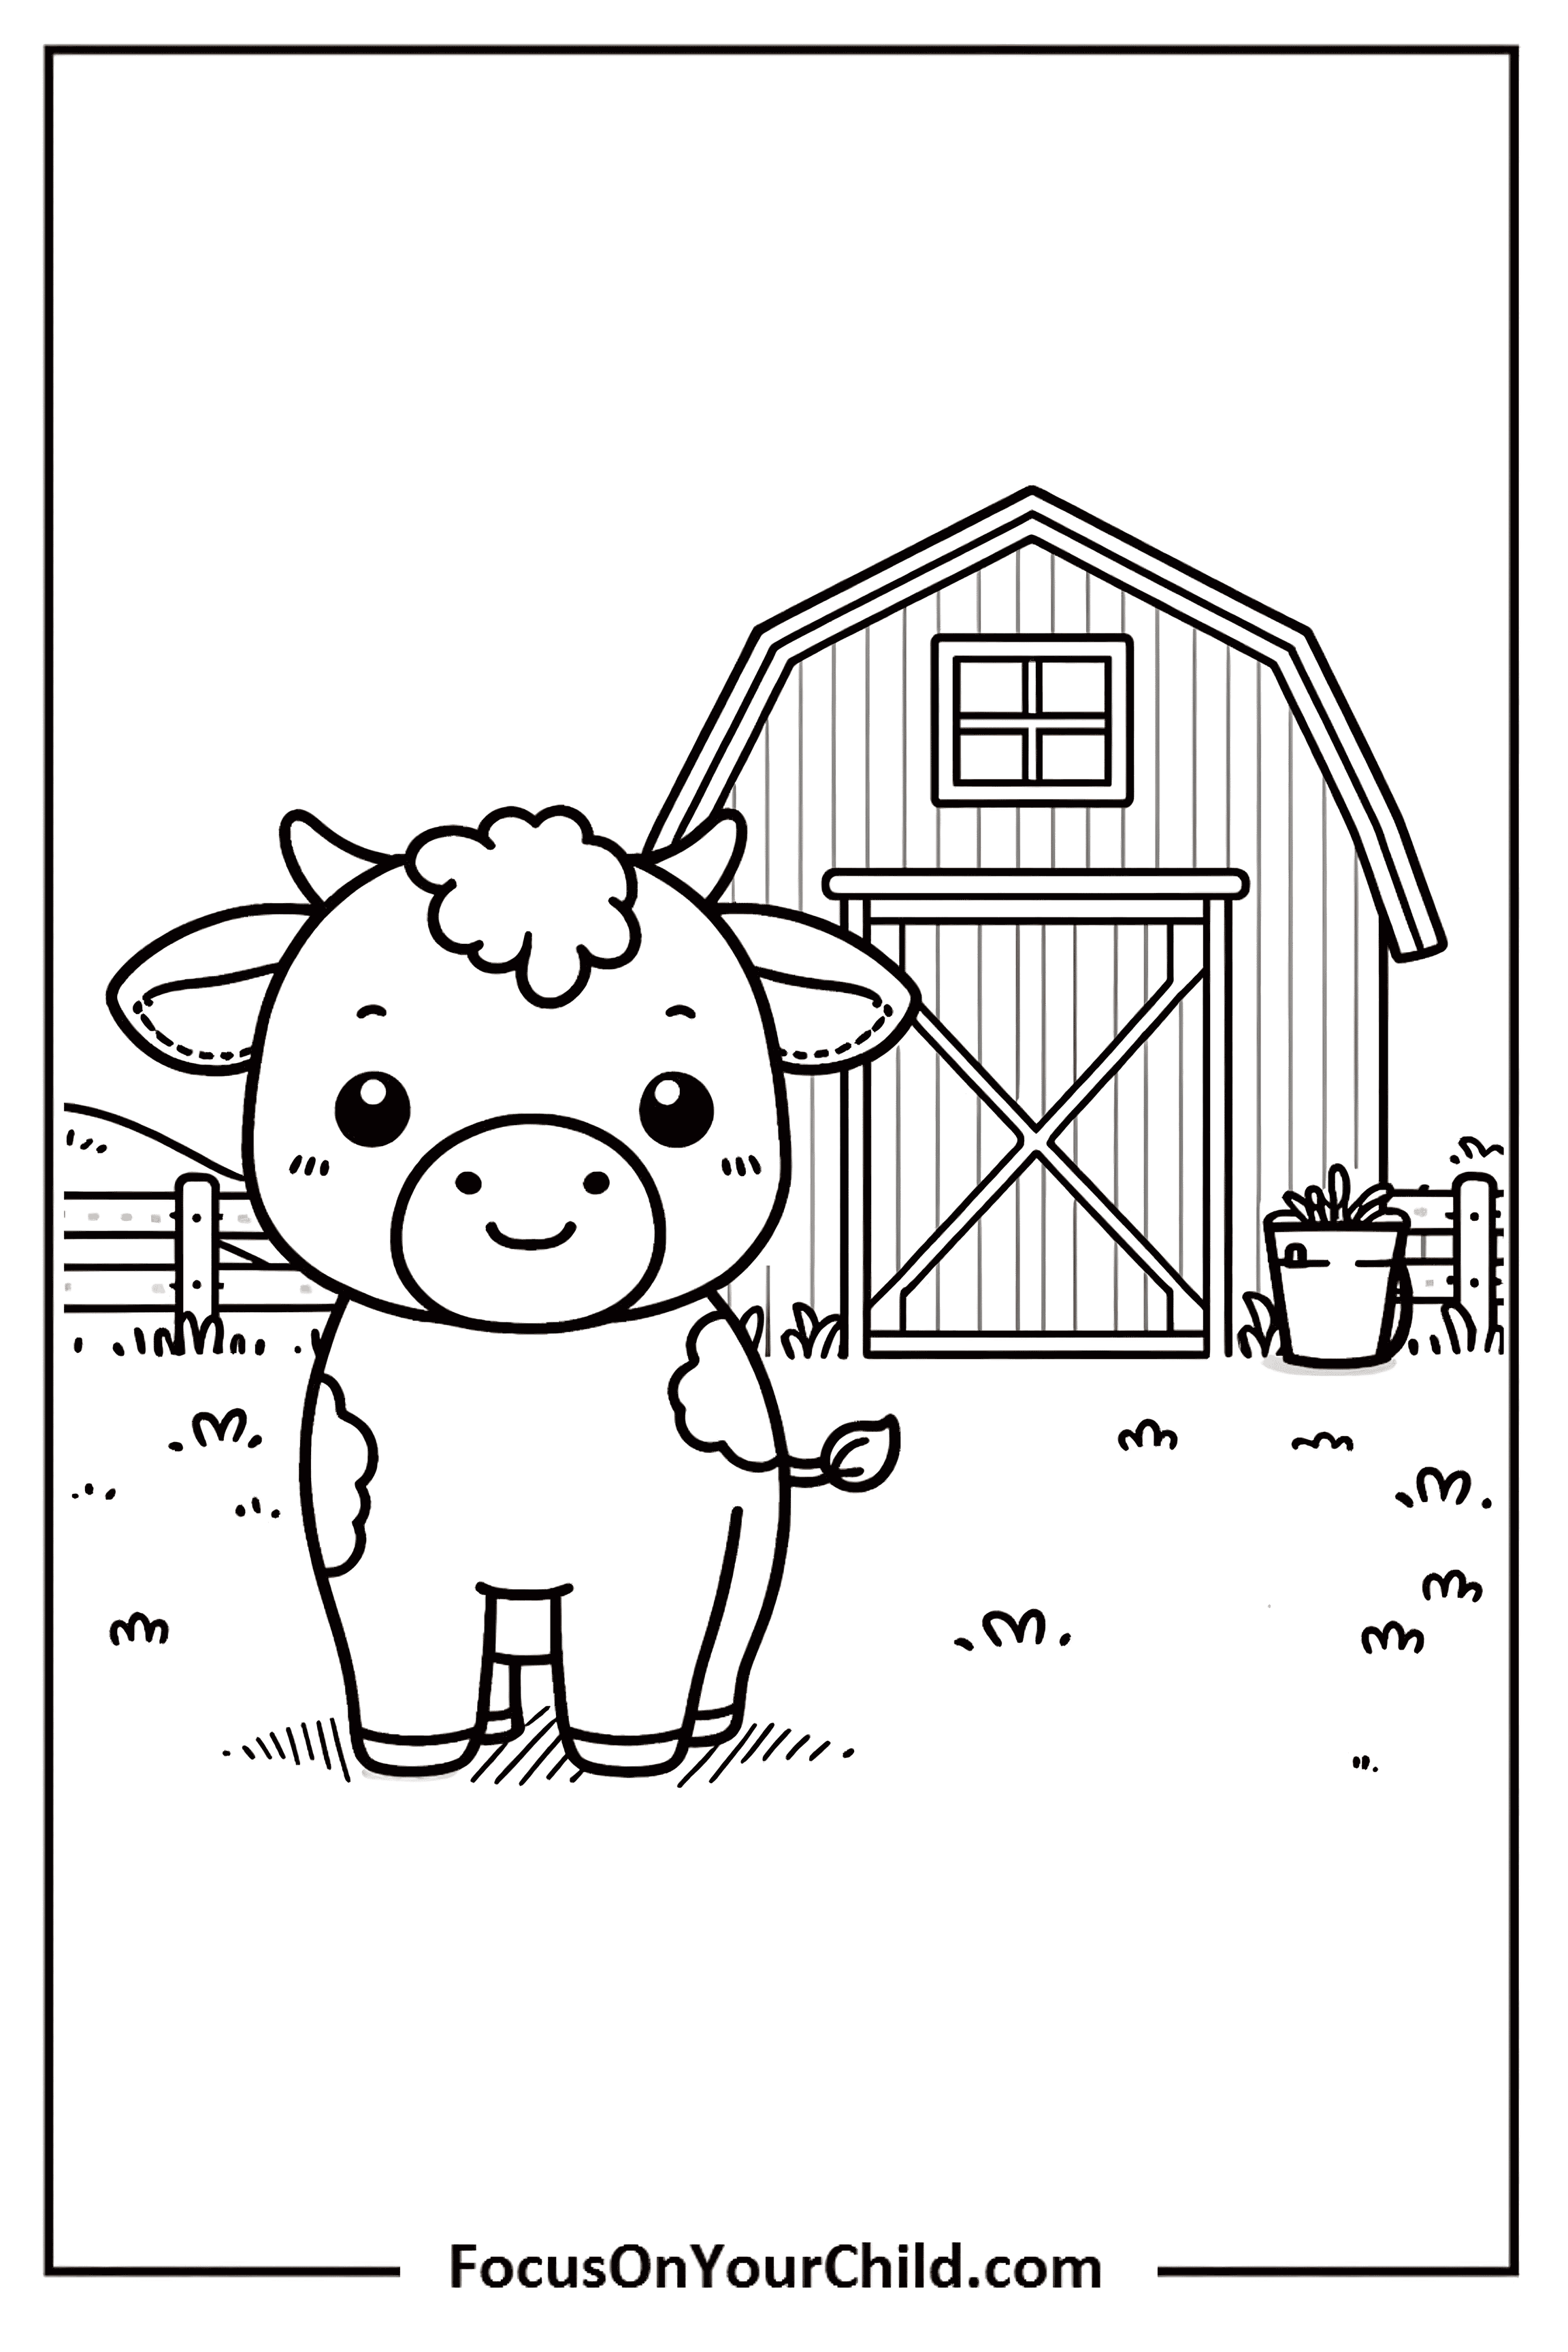 Charming cartoon cow in front of rustic barn on a farm.